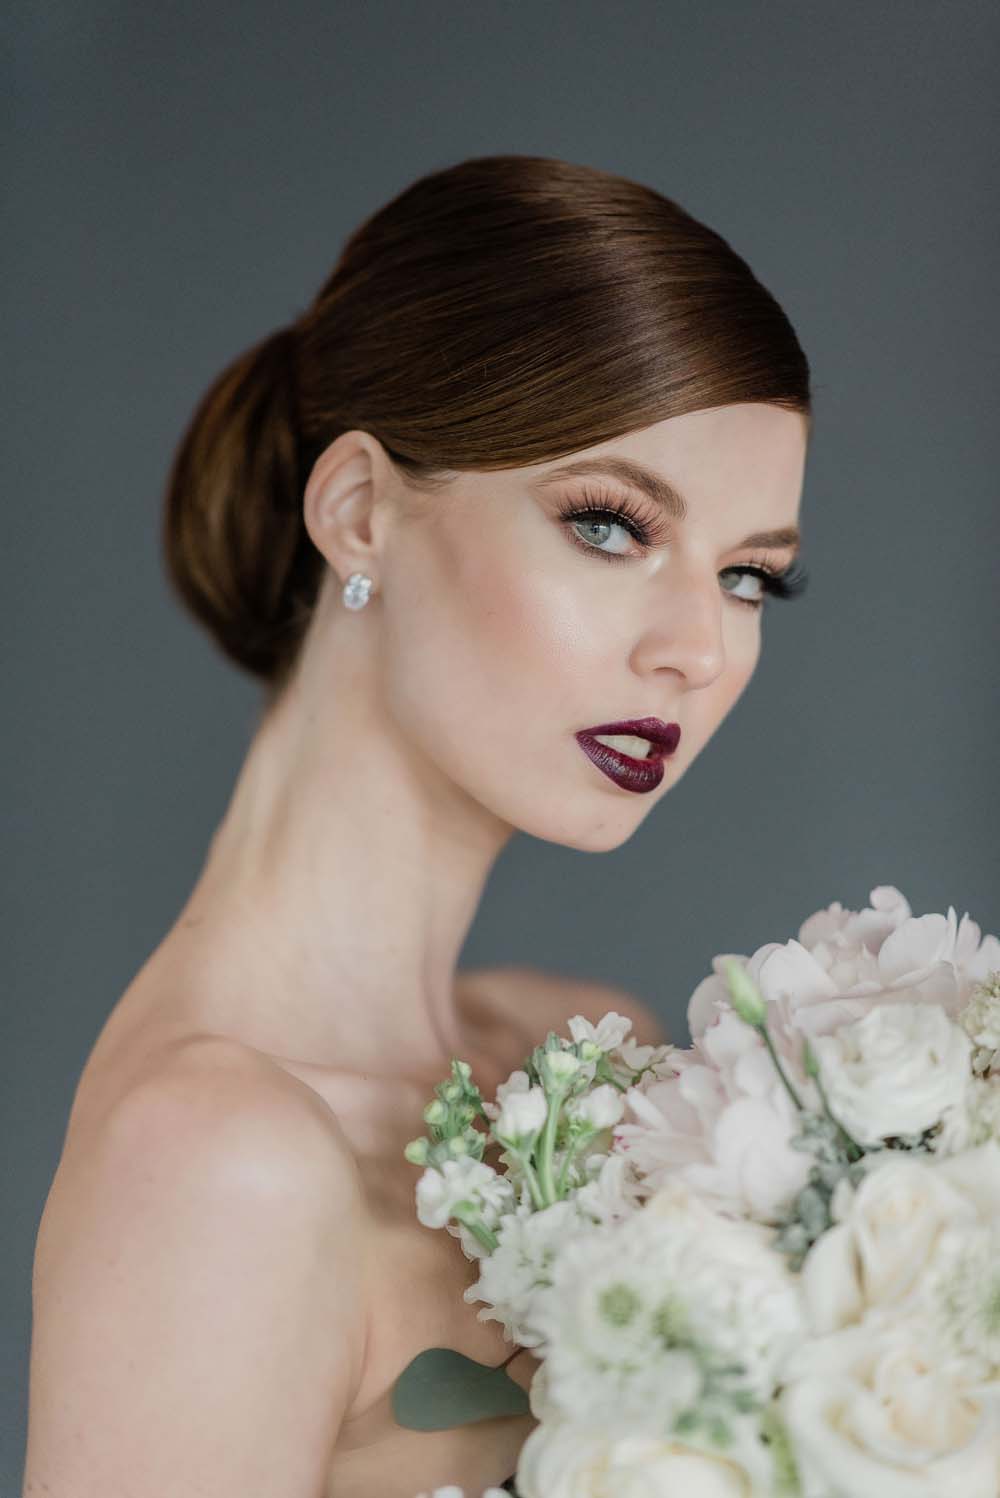 A Sophisticated Black and White Wedding Styled Shoot